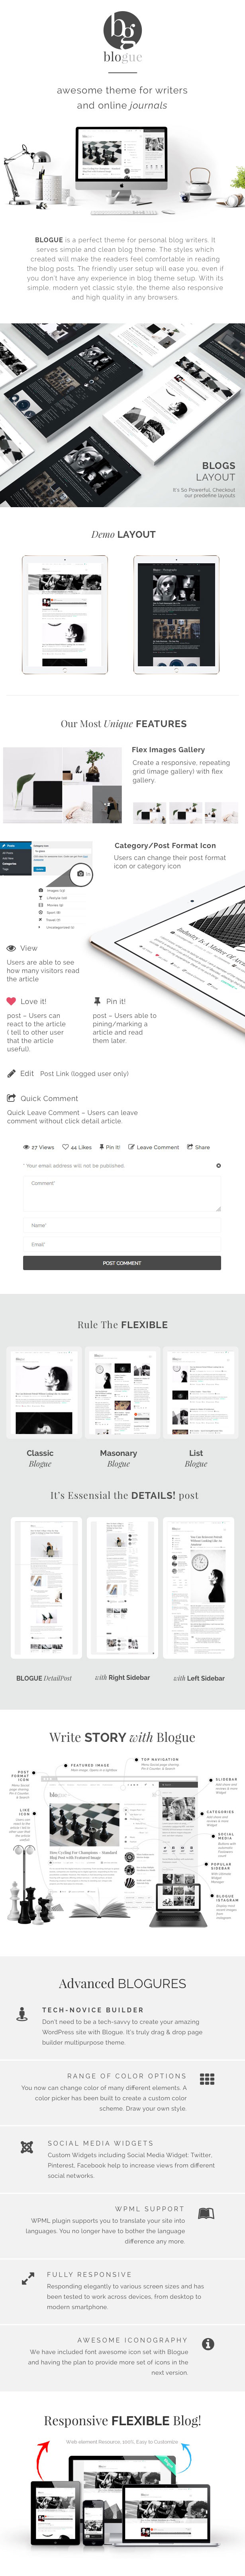 BLOGUE is a perfect theme for personal blog writers. It serves simple and clean blog theme. The styles which created will make the readers feel comfortable in reading the blog posts. The friendly user setup will ease you, even if you don't have any experience in blog theme setup. With its simple, modern yet classic style, the theme also responsive and high quality in any browsers